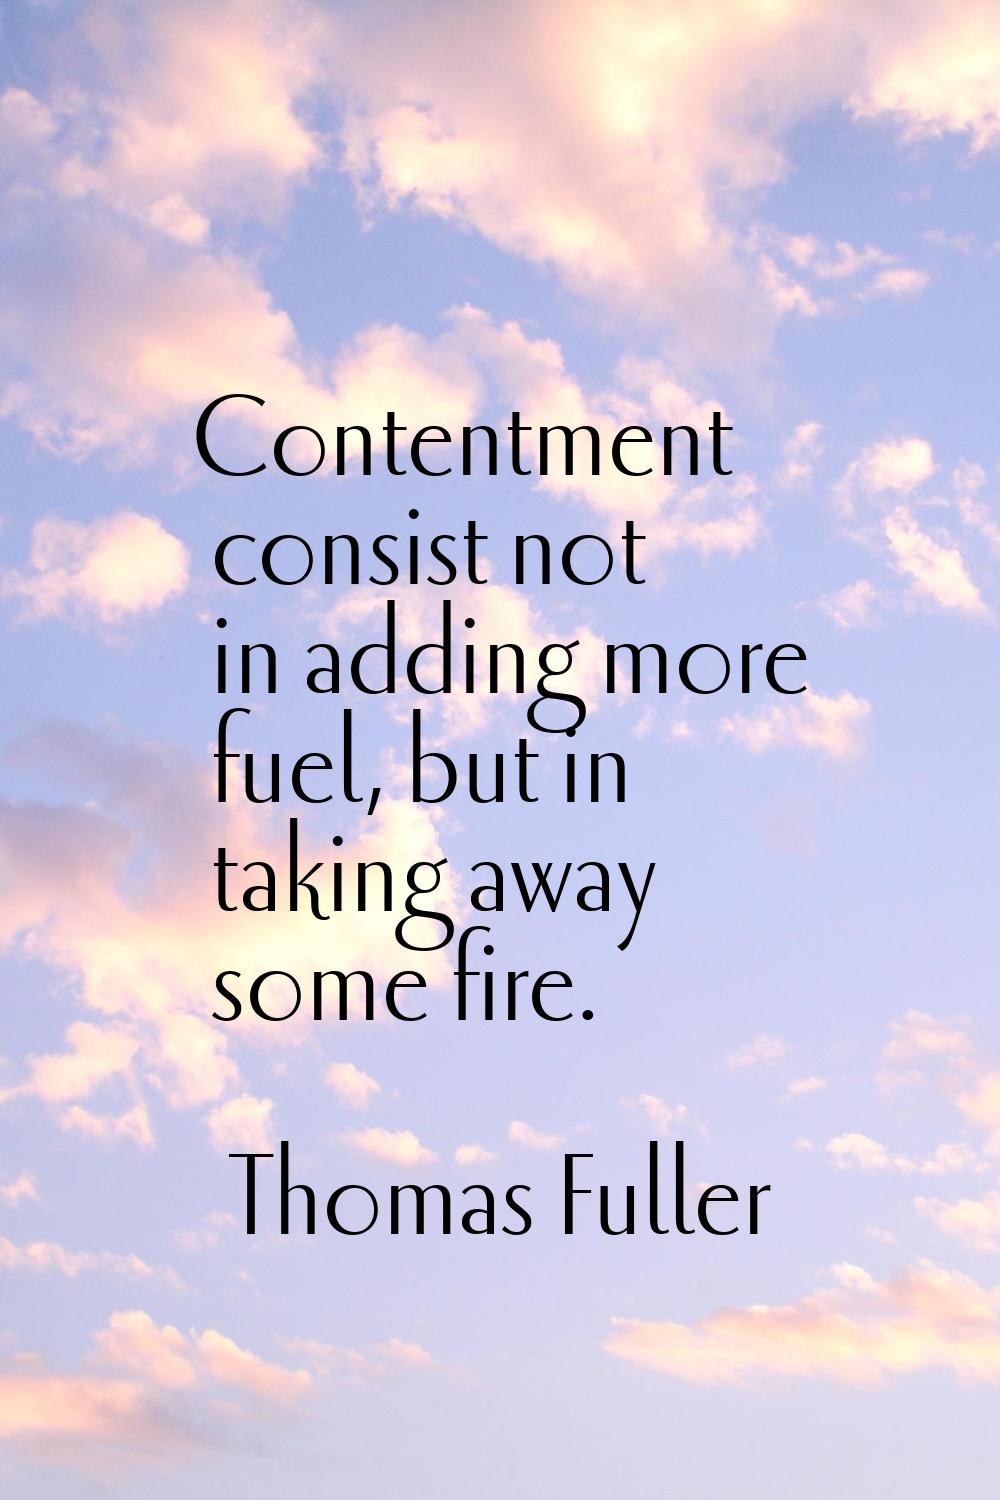 Contentment consist not in adding more fuel, but in taking away some fire.